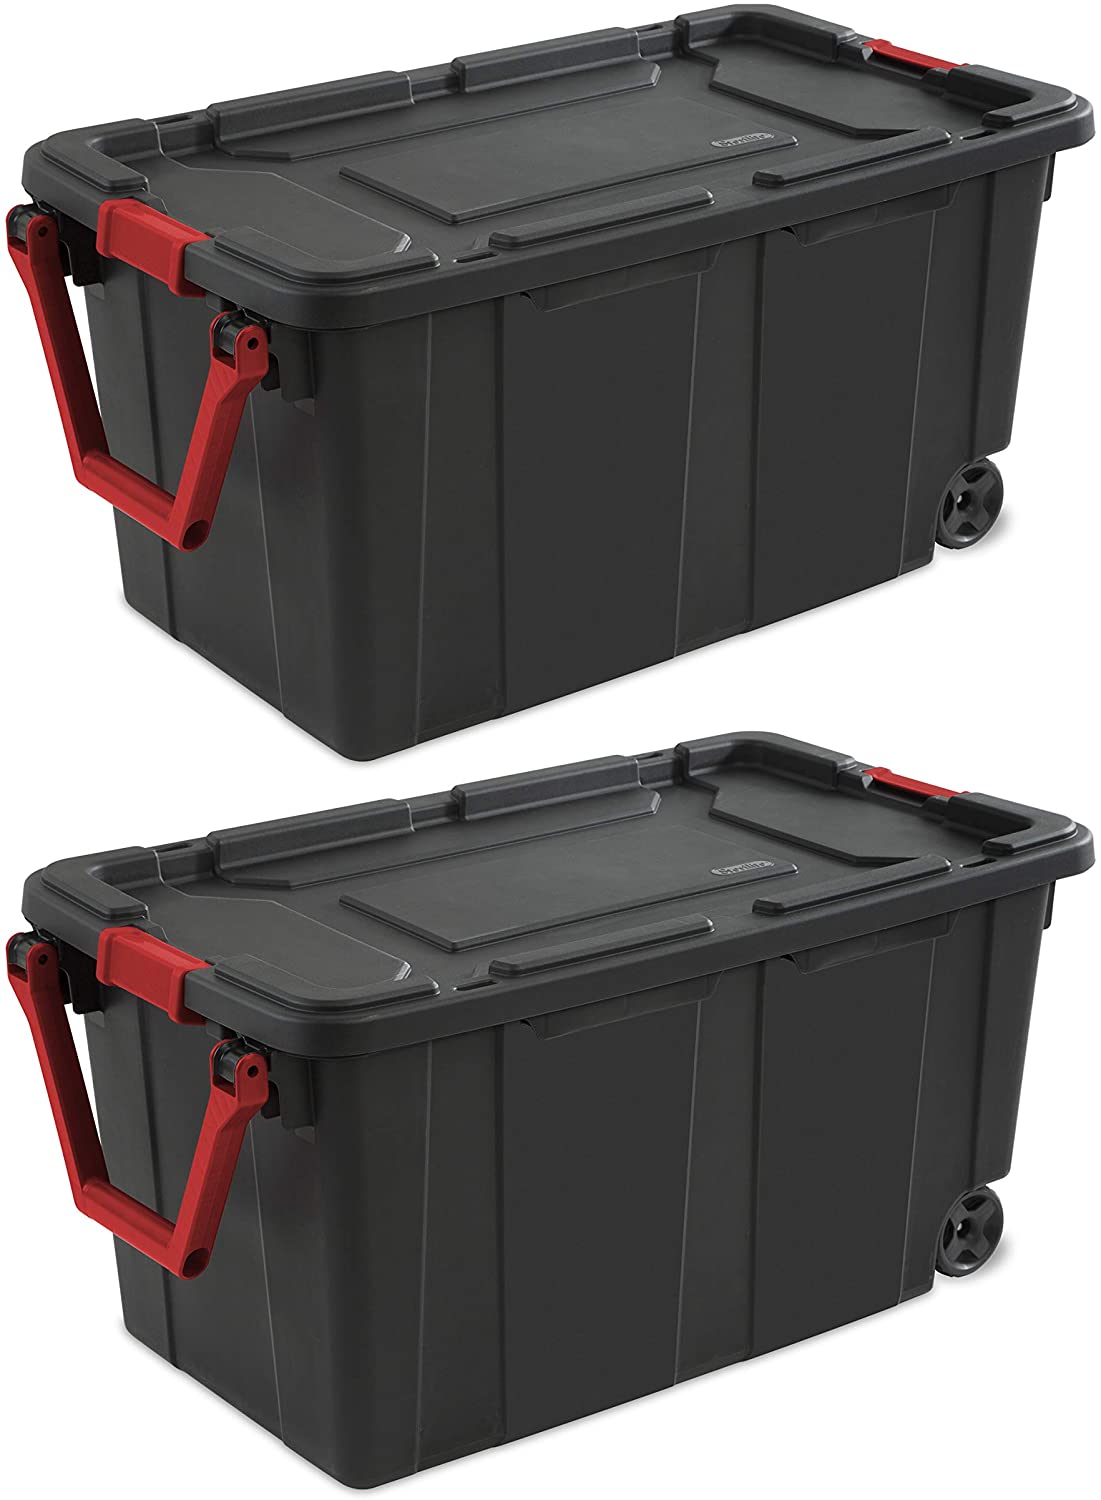 Sterilite 14699002 40 Gallon//151 Liter Wheeled Industrial Tote A Yellow Lily Black Lid /& Base w//Racer Red Handle /& Latches 2-Pack